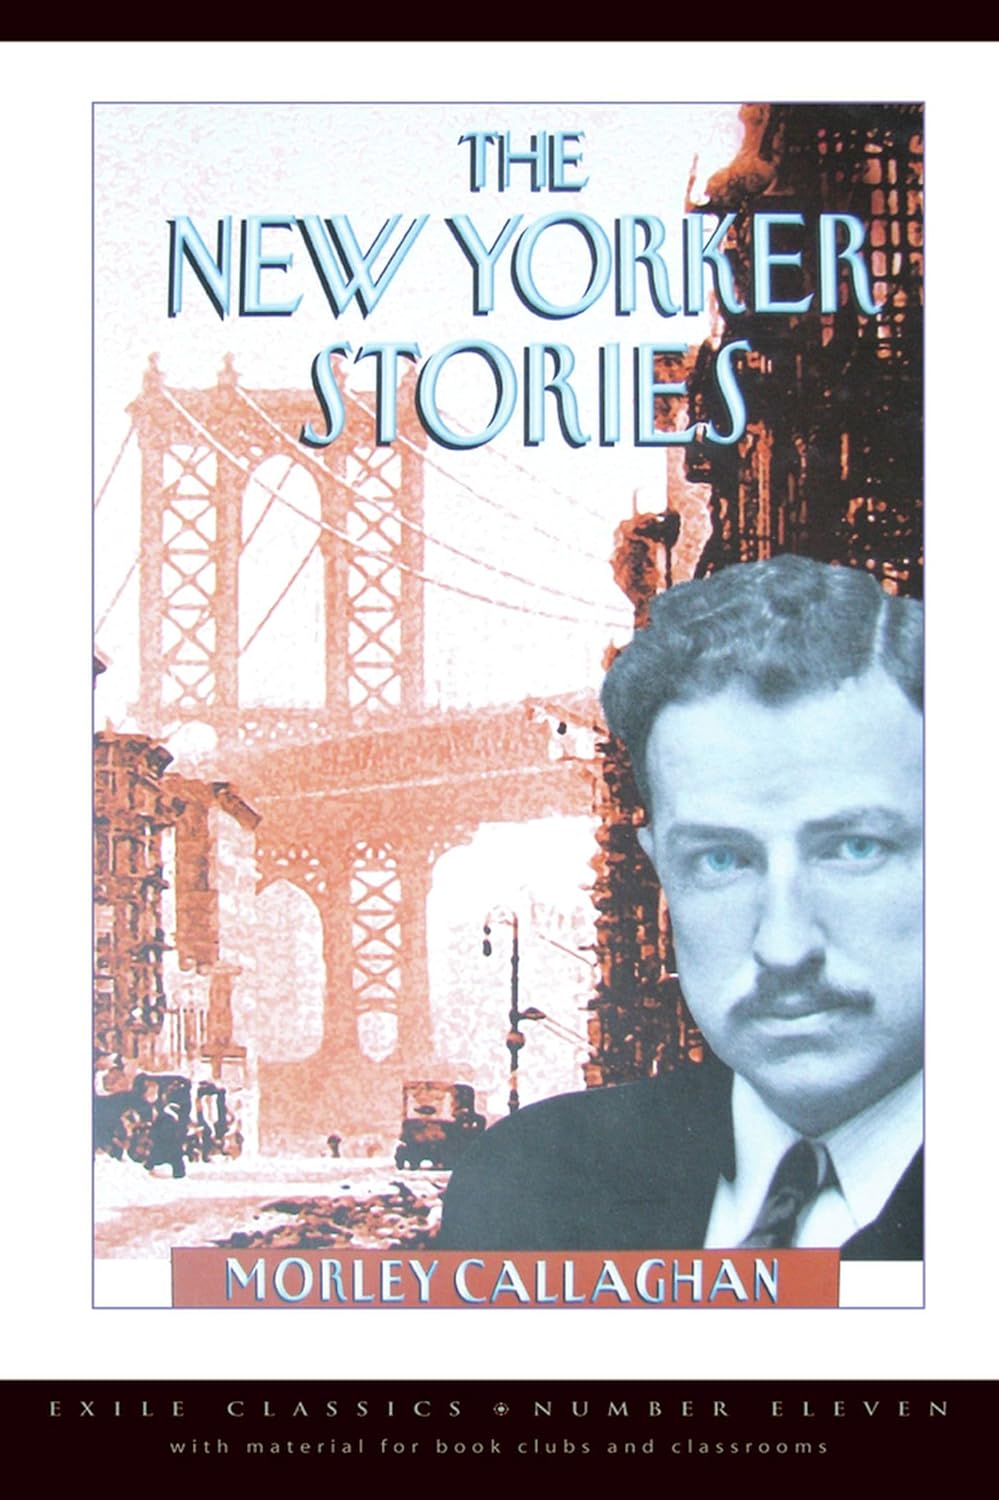 New Yorker Stories (Callaghan - paperback)